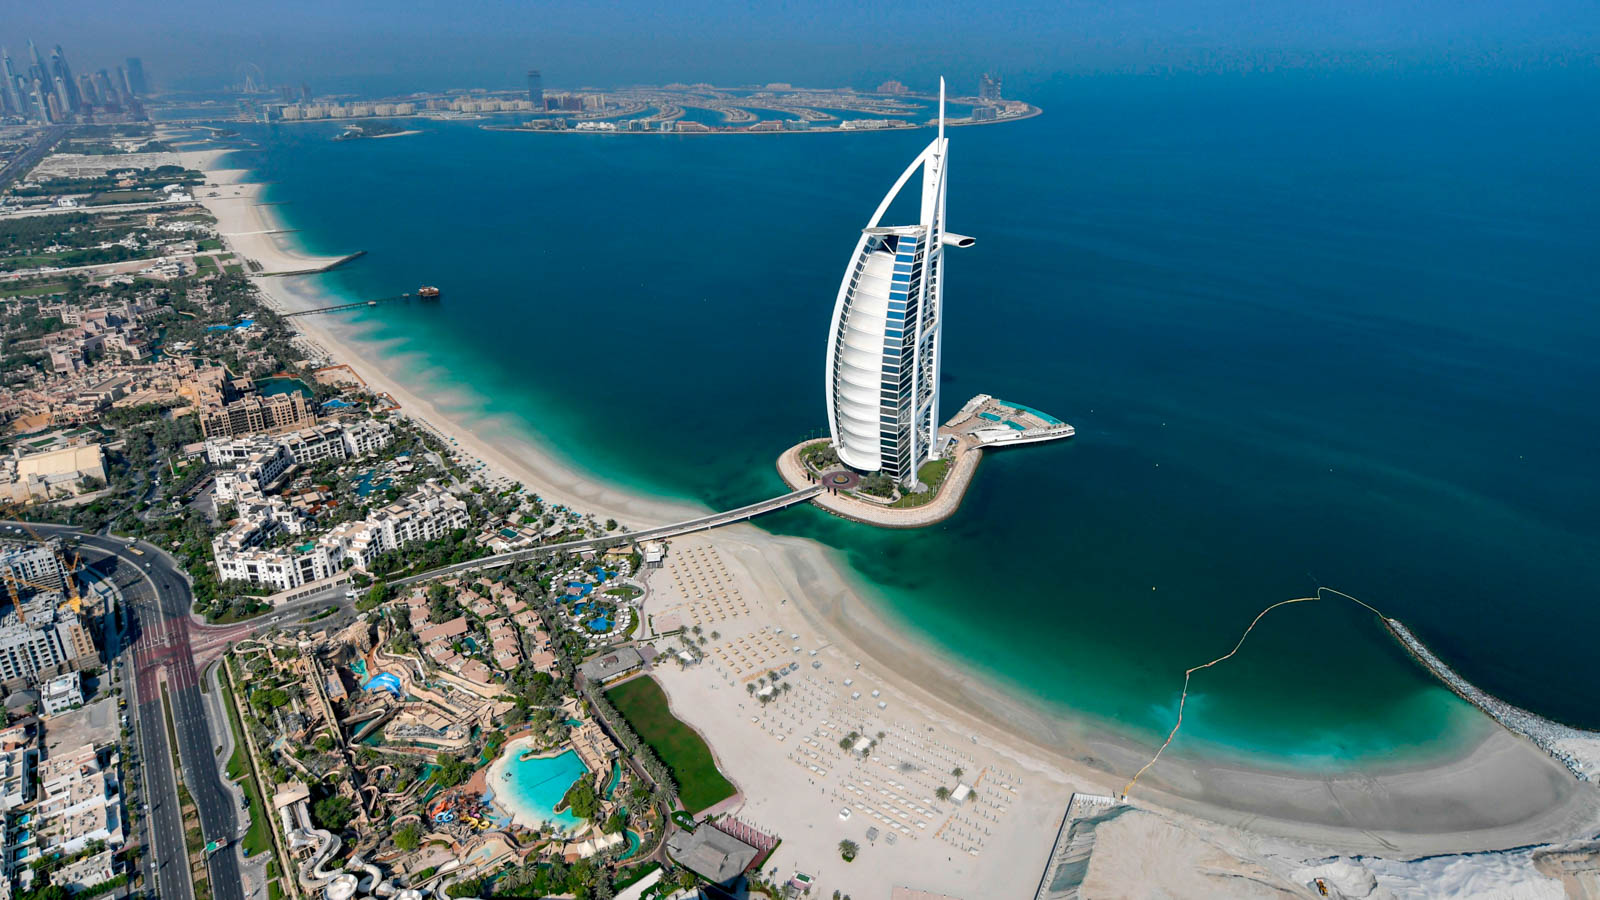 6,000 dwelling units from Dubai Holding: Dubai smites again with its immensity